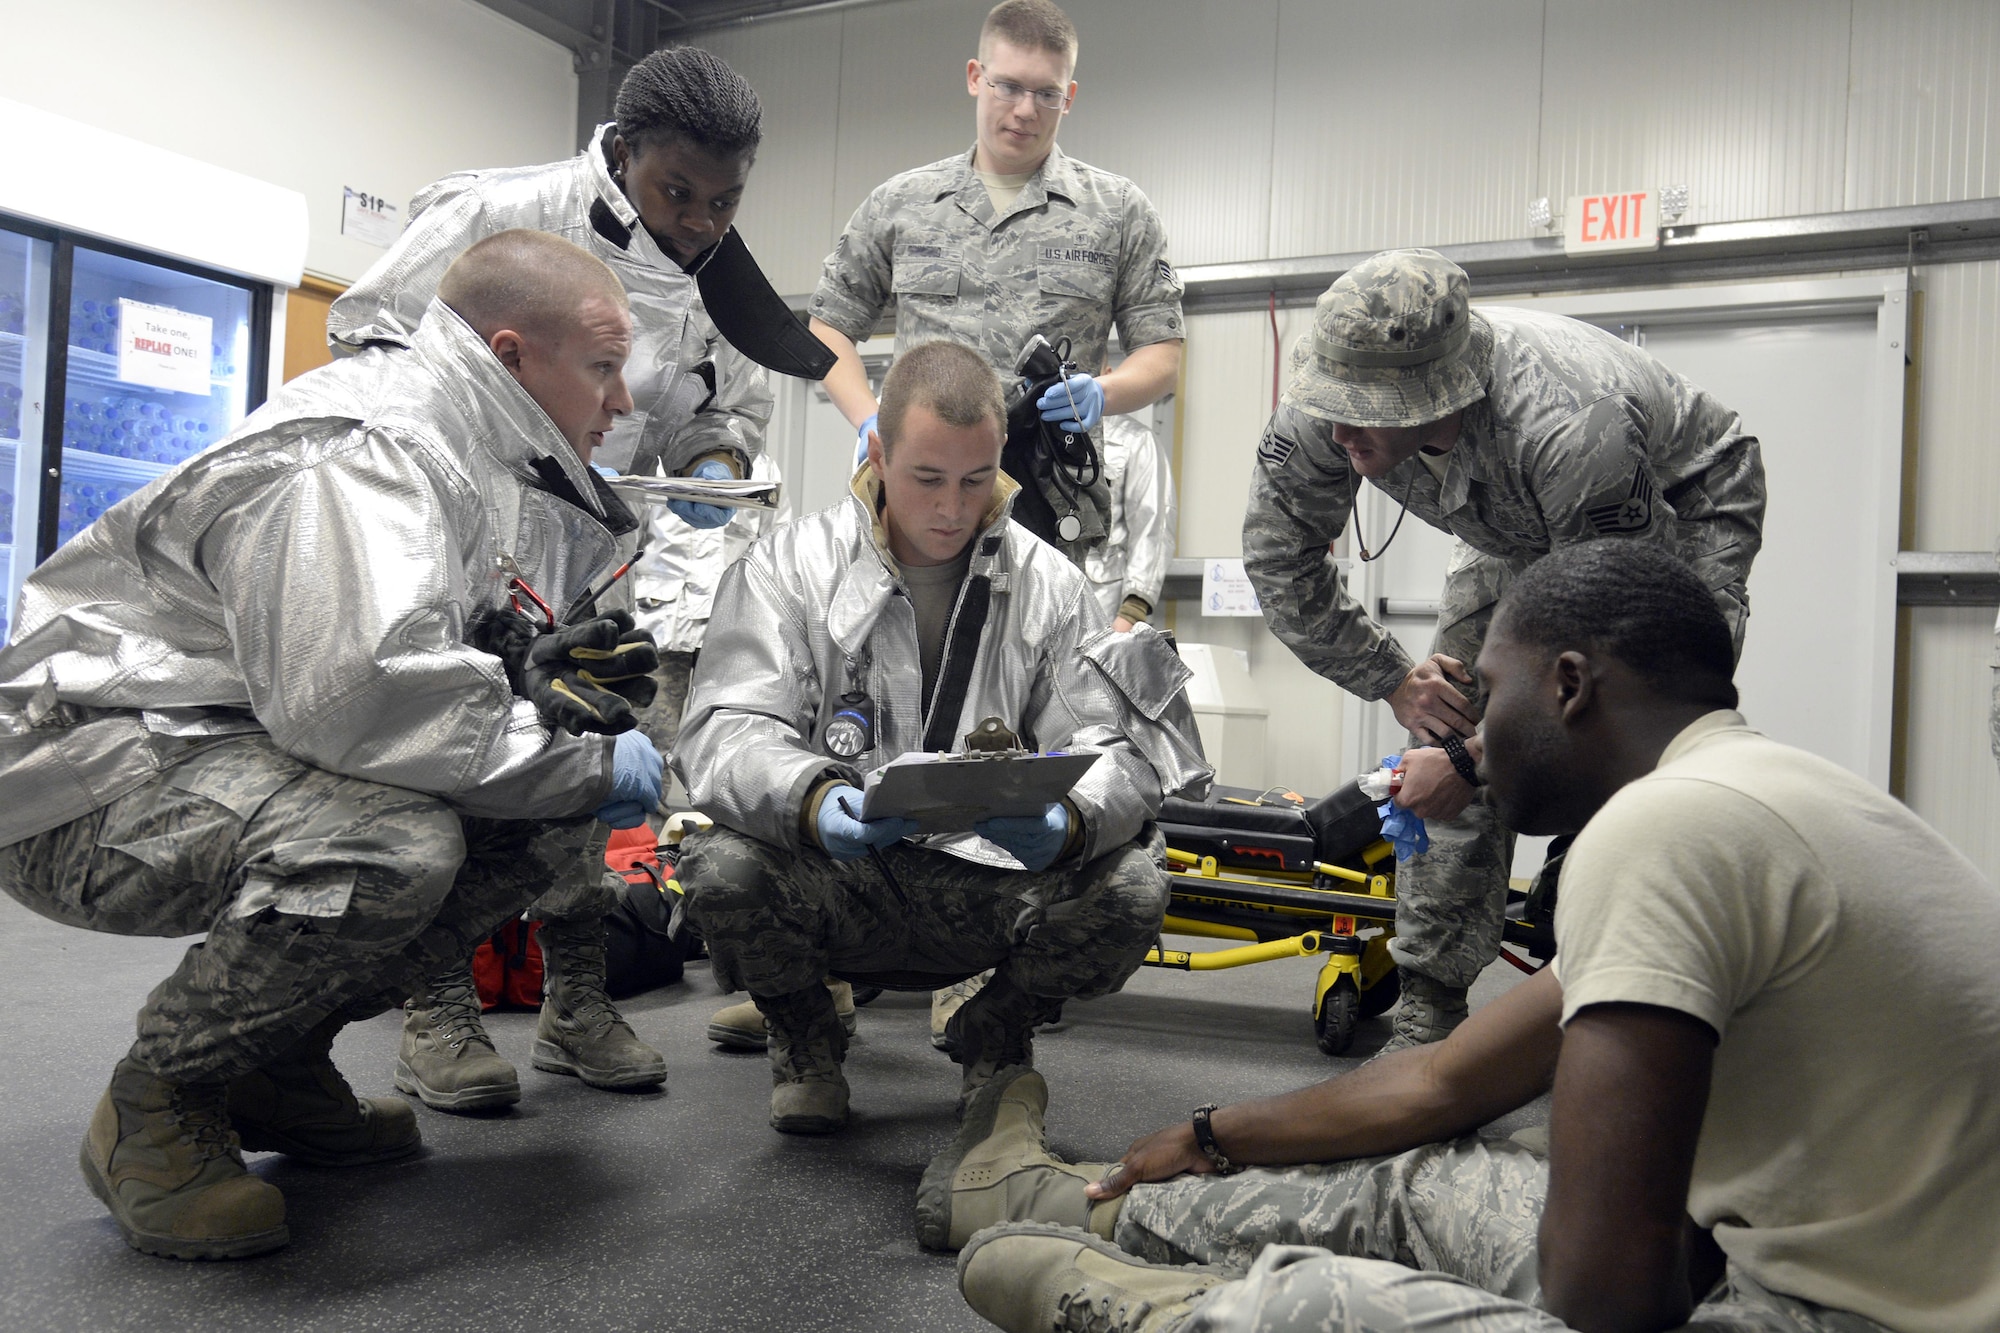 Airmen from the Expeditionary Civil Engineer Squadron and Expeditionary Medical Group evaluate a simulated patient during a training exercise at an undisclosed location in Southwest Asia Jan. 15, 2015. The Airmen were evaluated on identifying symptoms, locating a secure area for the quarantine and isolation of the patients as well as coordinating aeromedical evacuation for the patients. (U.S. Air Force photo/Tech. Sgt. Marie Brown)